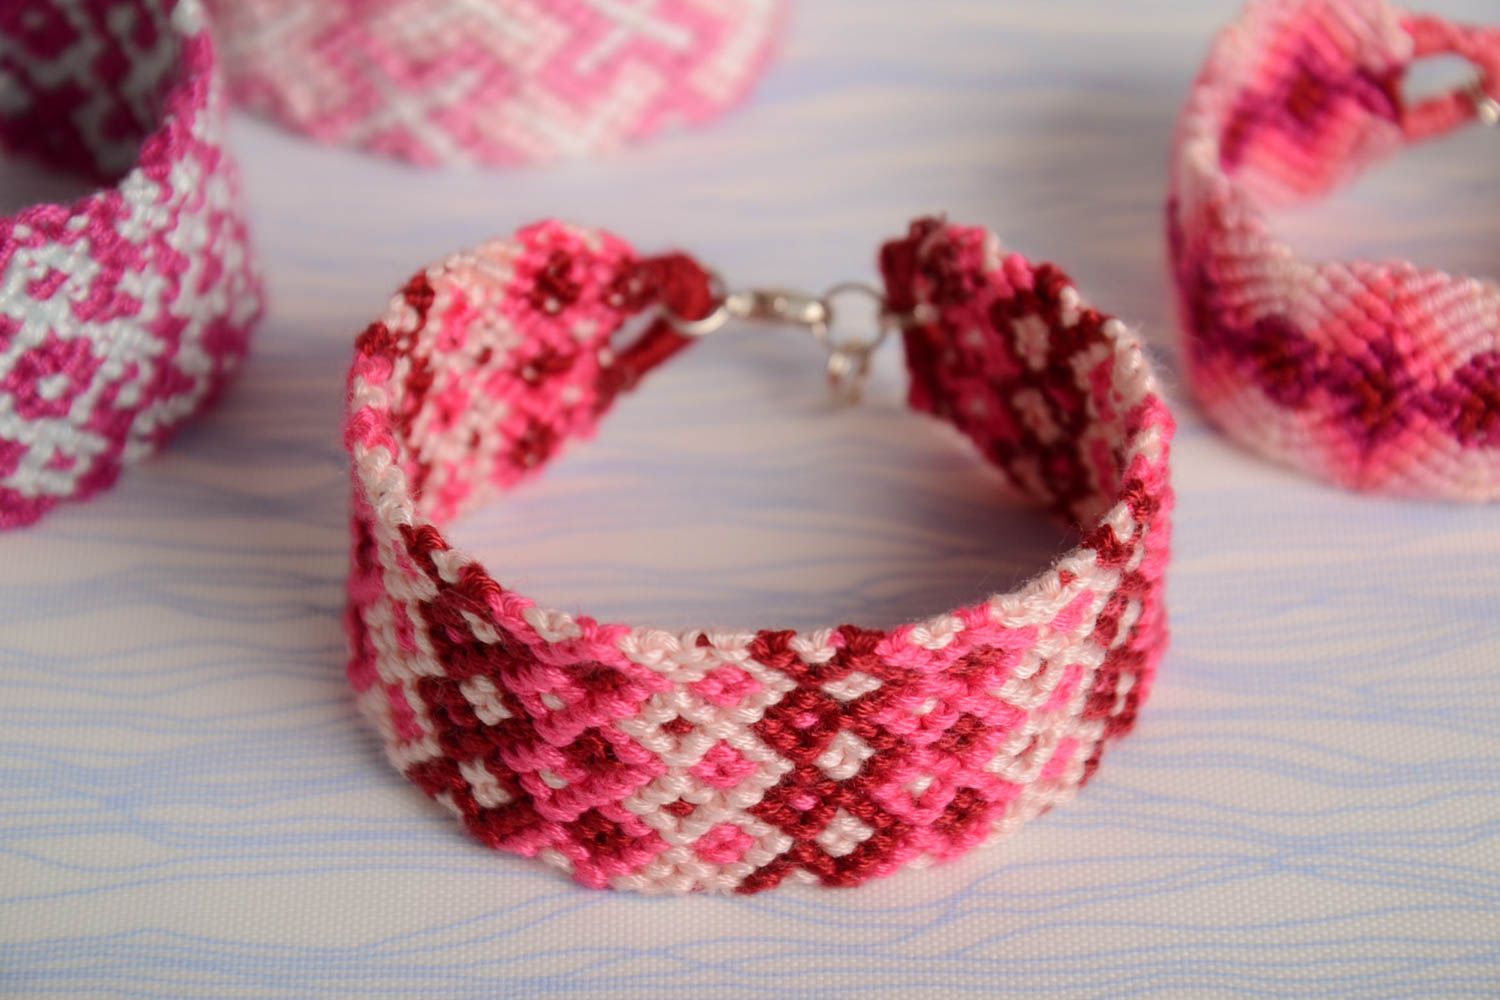 Beautiful dark red and pink handmade wide bracelet woven of embroidery floss photo 1